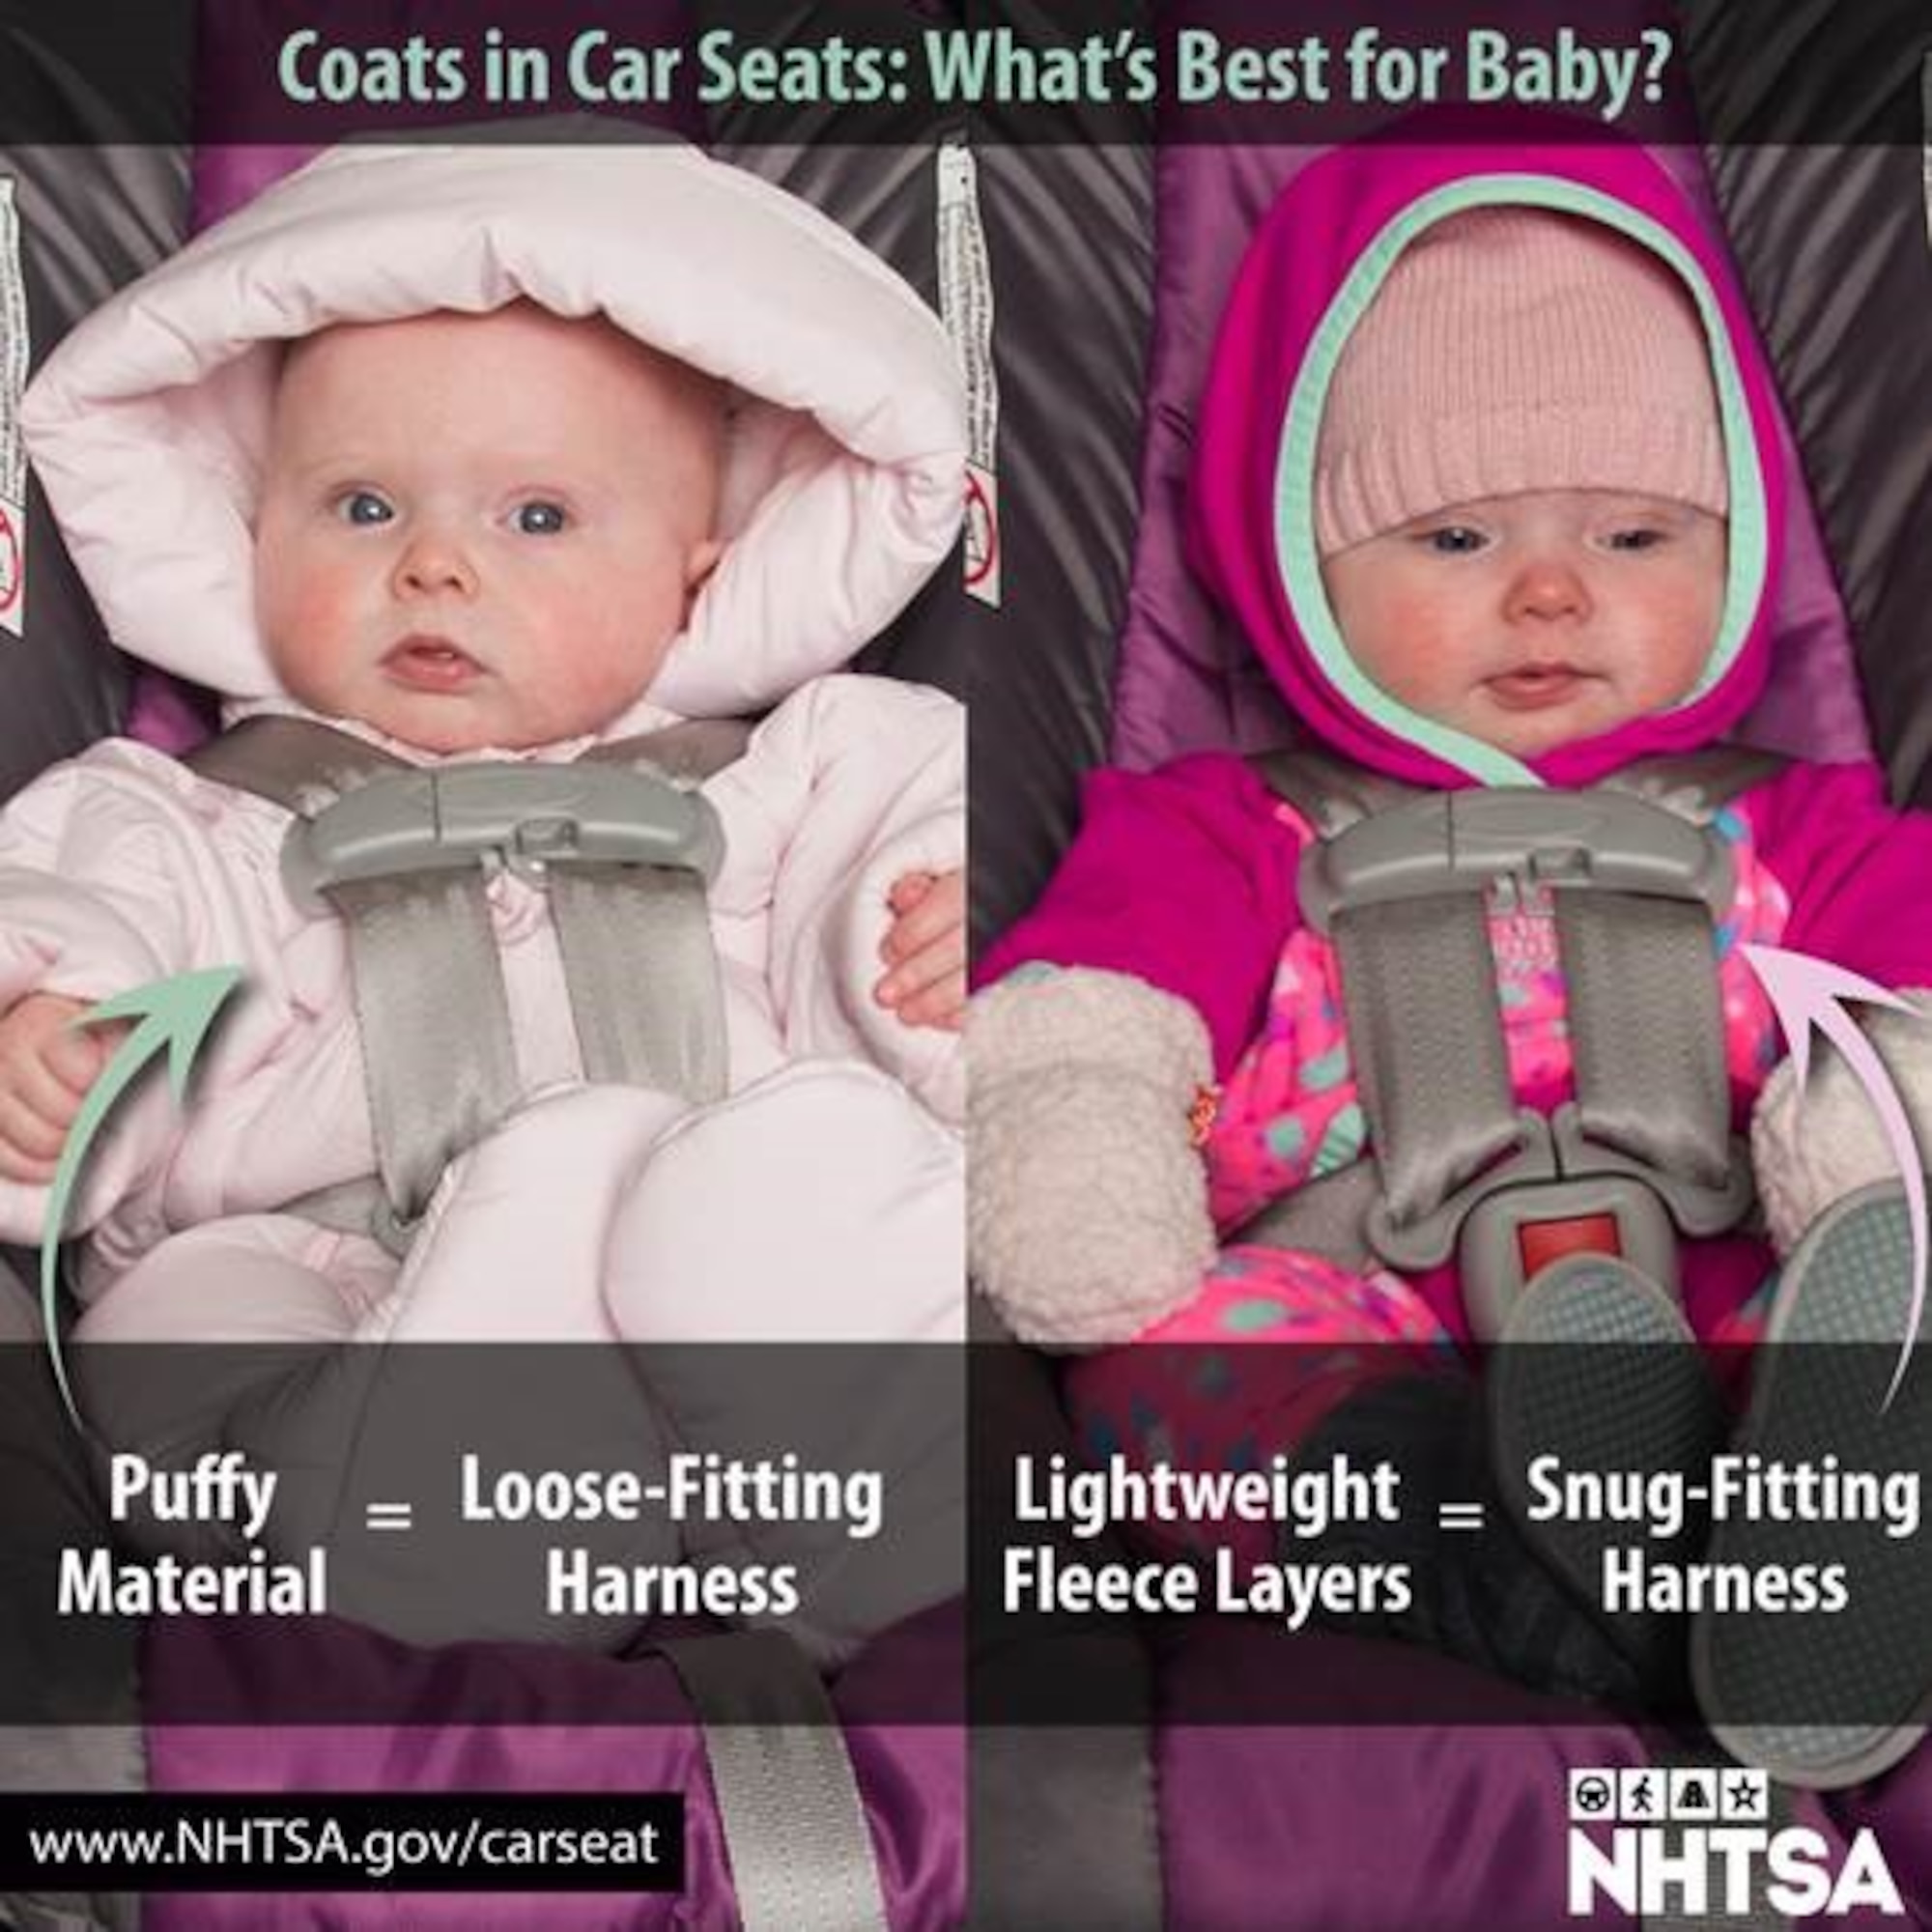 Child car seats: a matter of safety